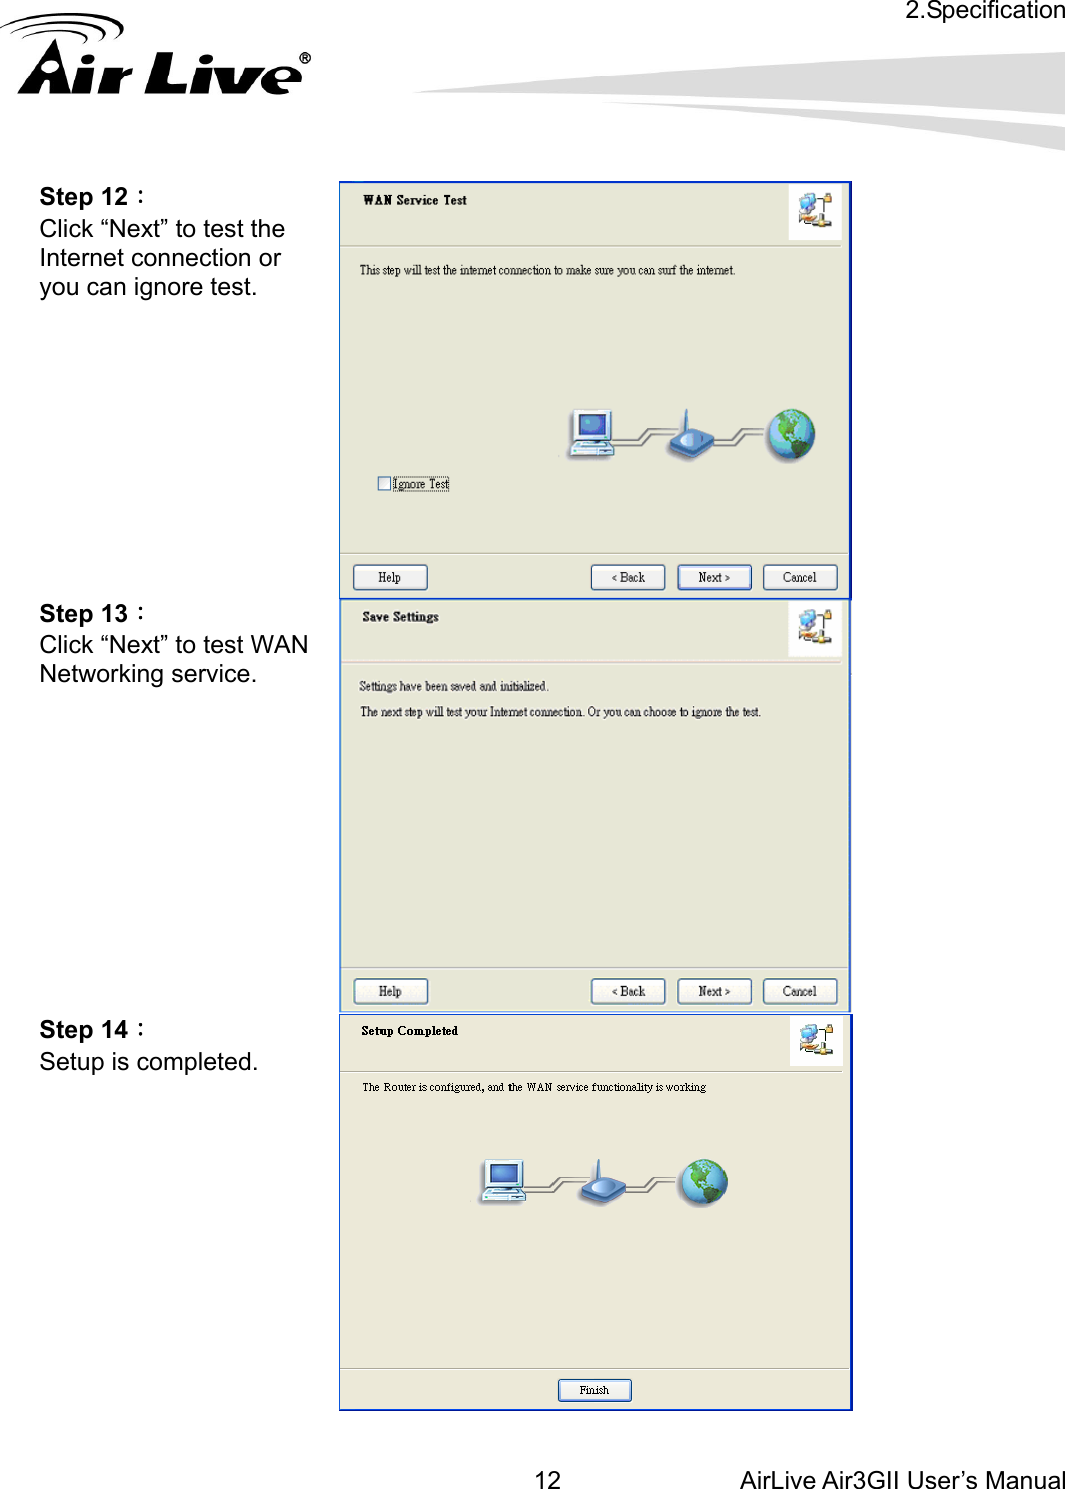 2.Specification AirLive Air3GII User’s Manual 12Step 12：  to test the      Click “Next”Internet connection or you can ignore test.  Step 13：  to test WAN Click “Next”Networking service.  Step 14： pleted. Setup is com  